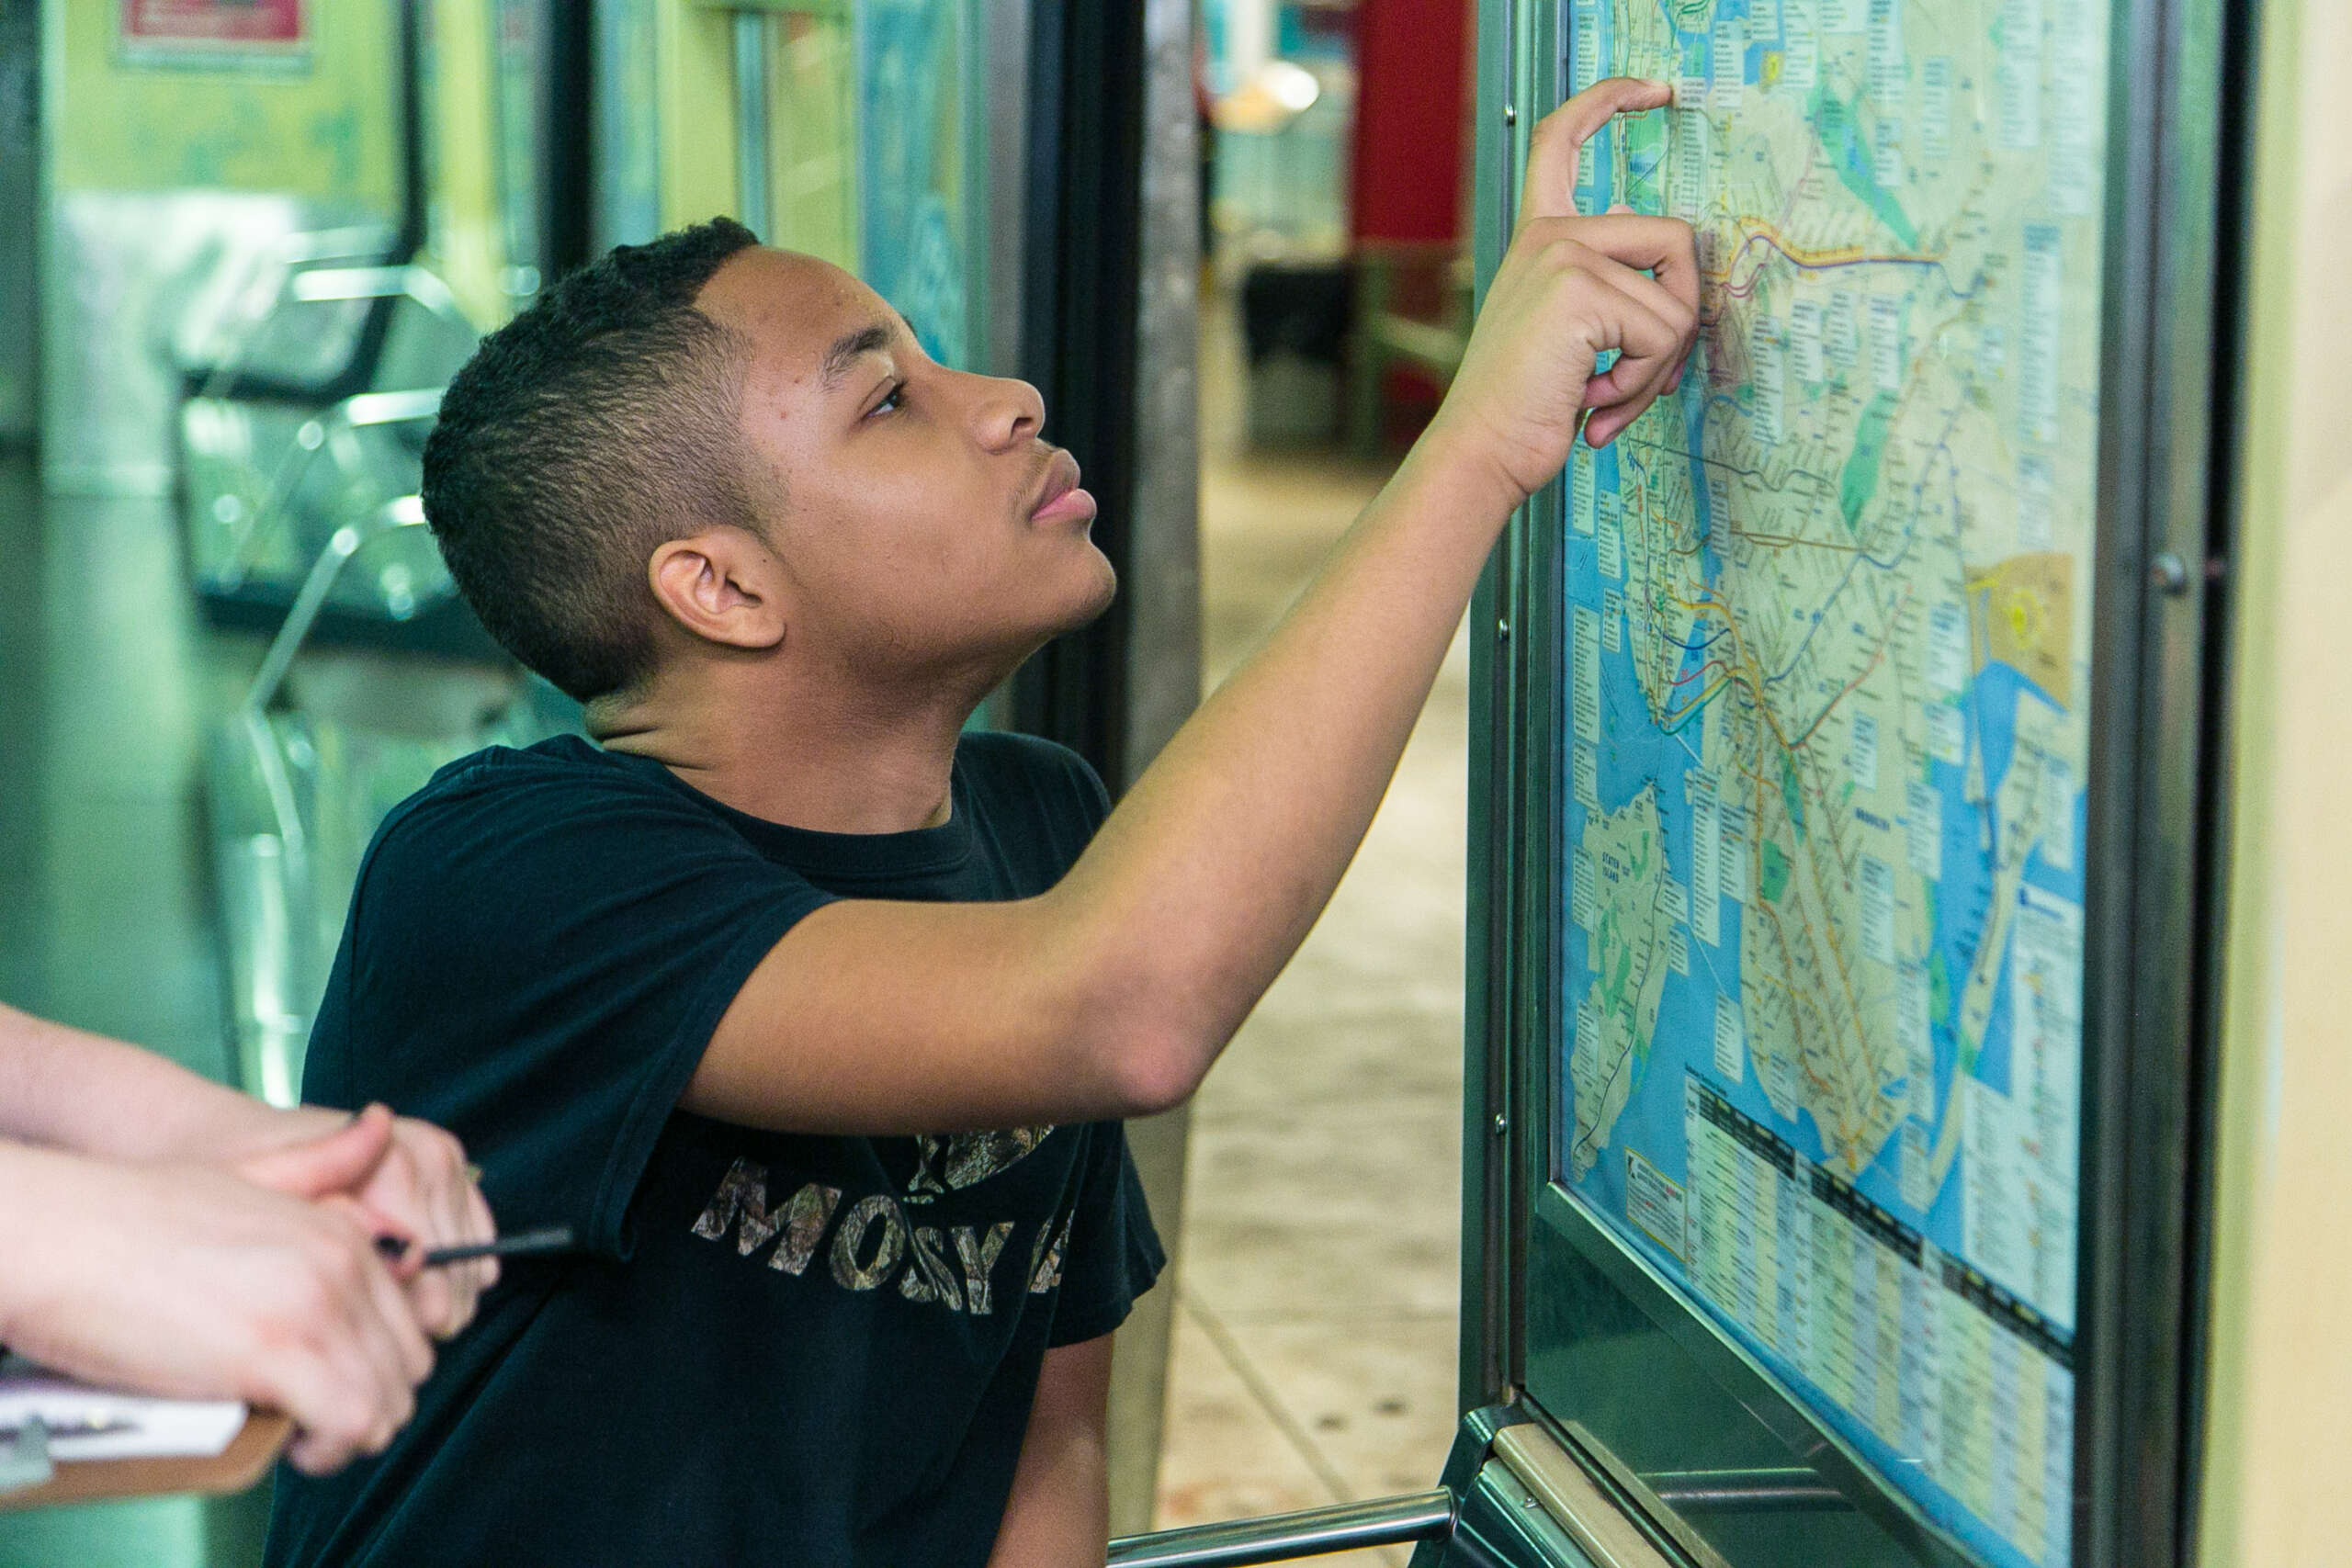 A teenager traces a route on a subway map.